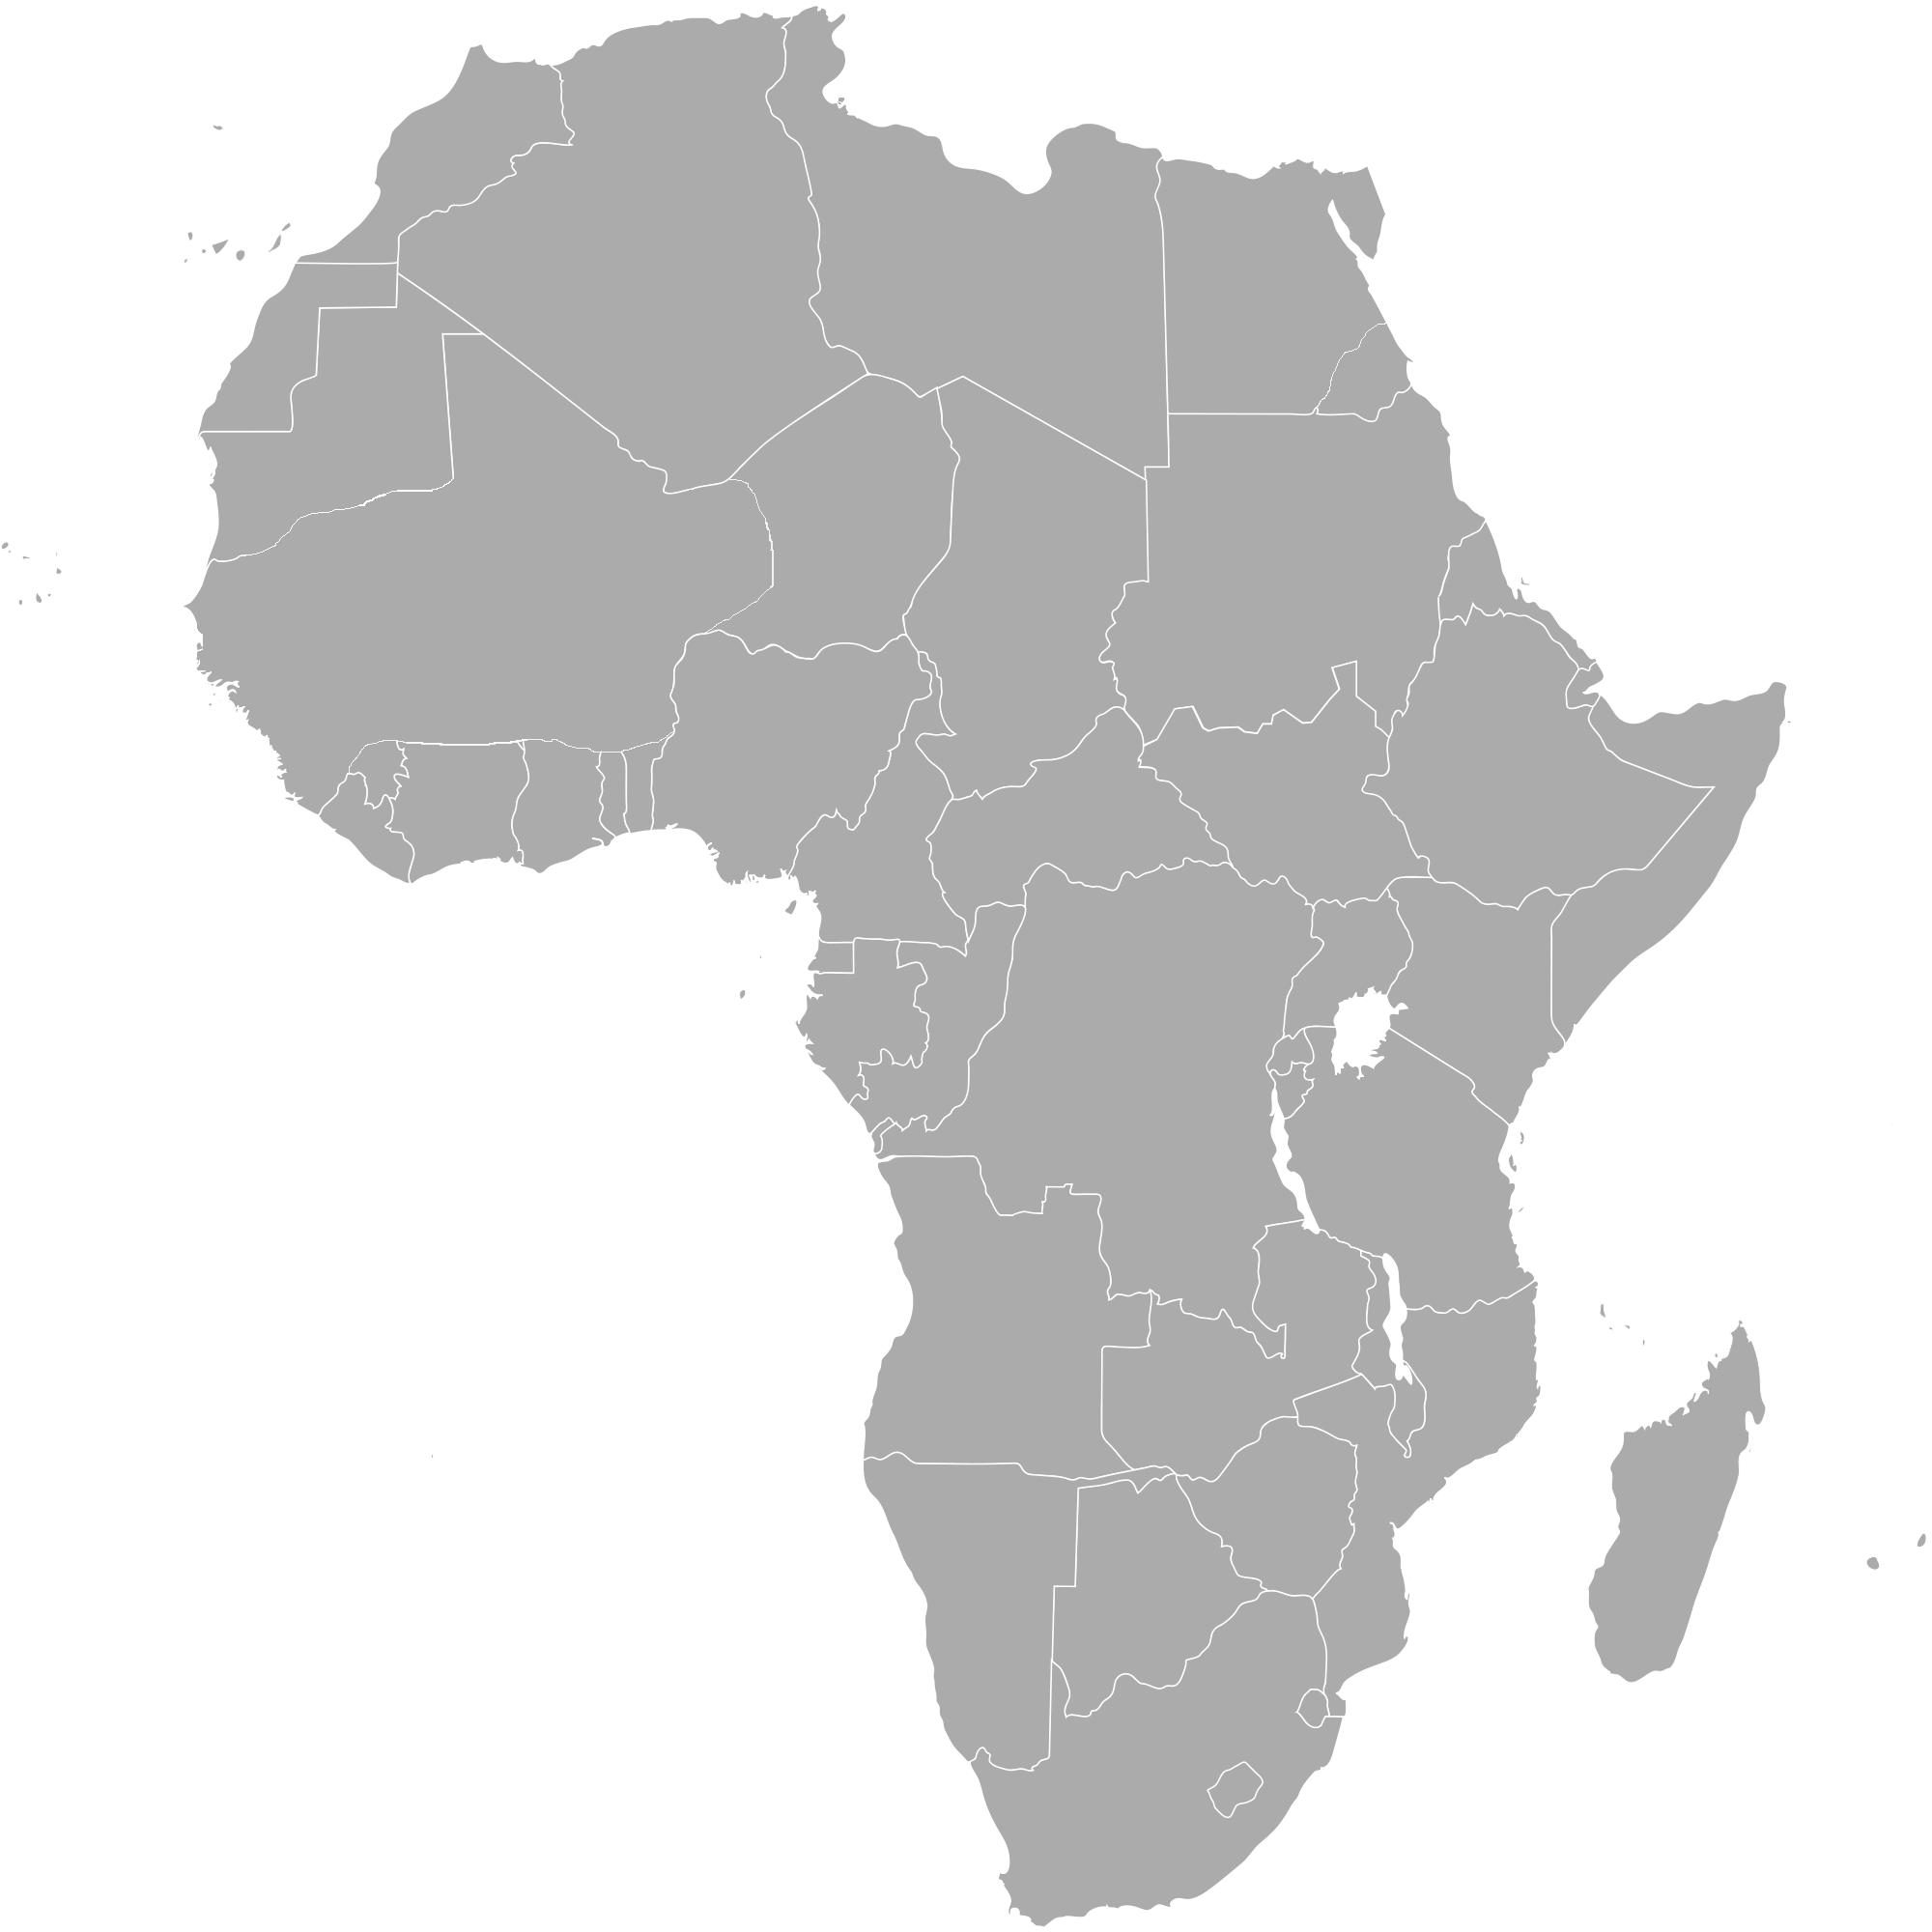 Africa Map Png